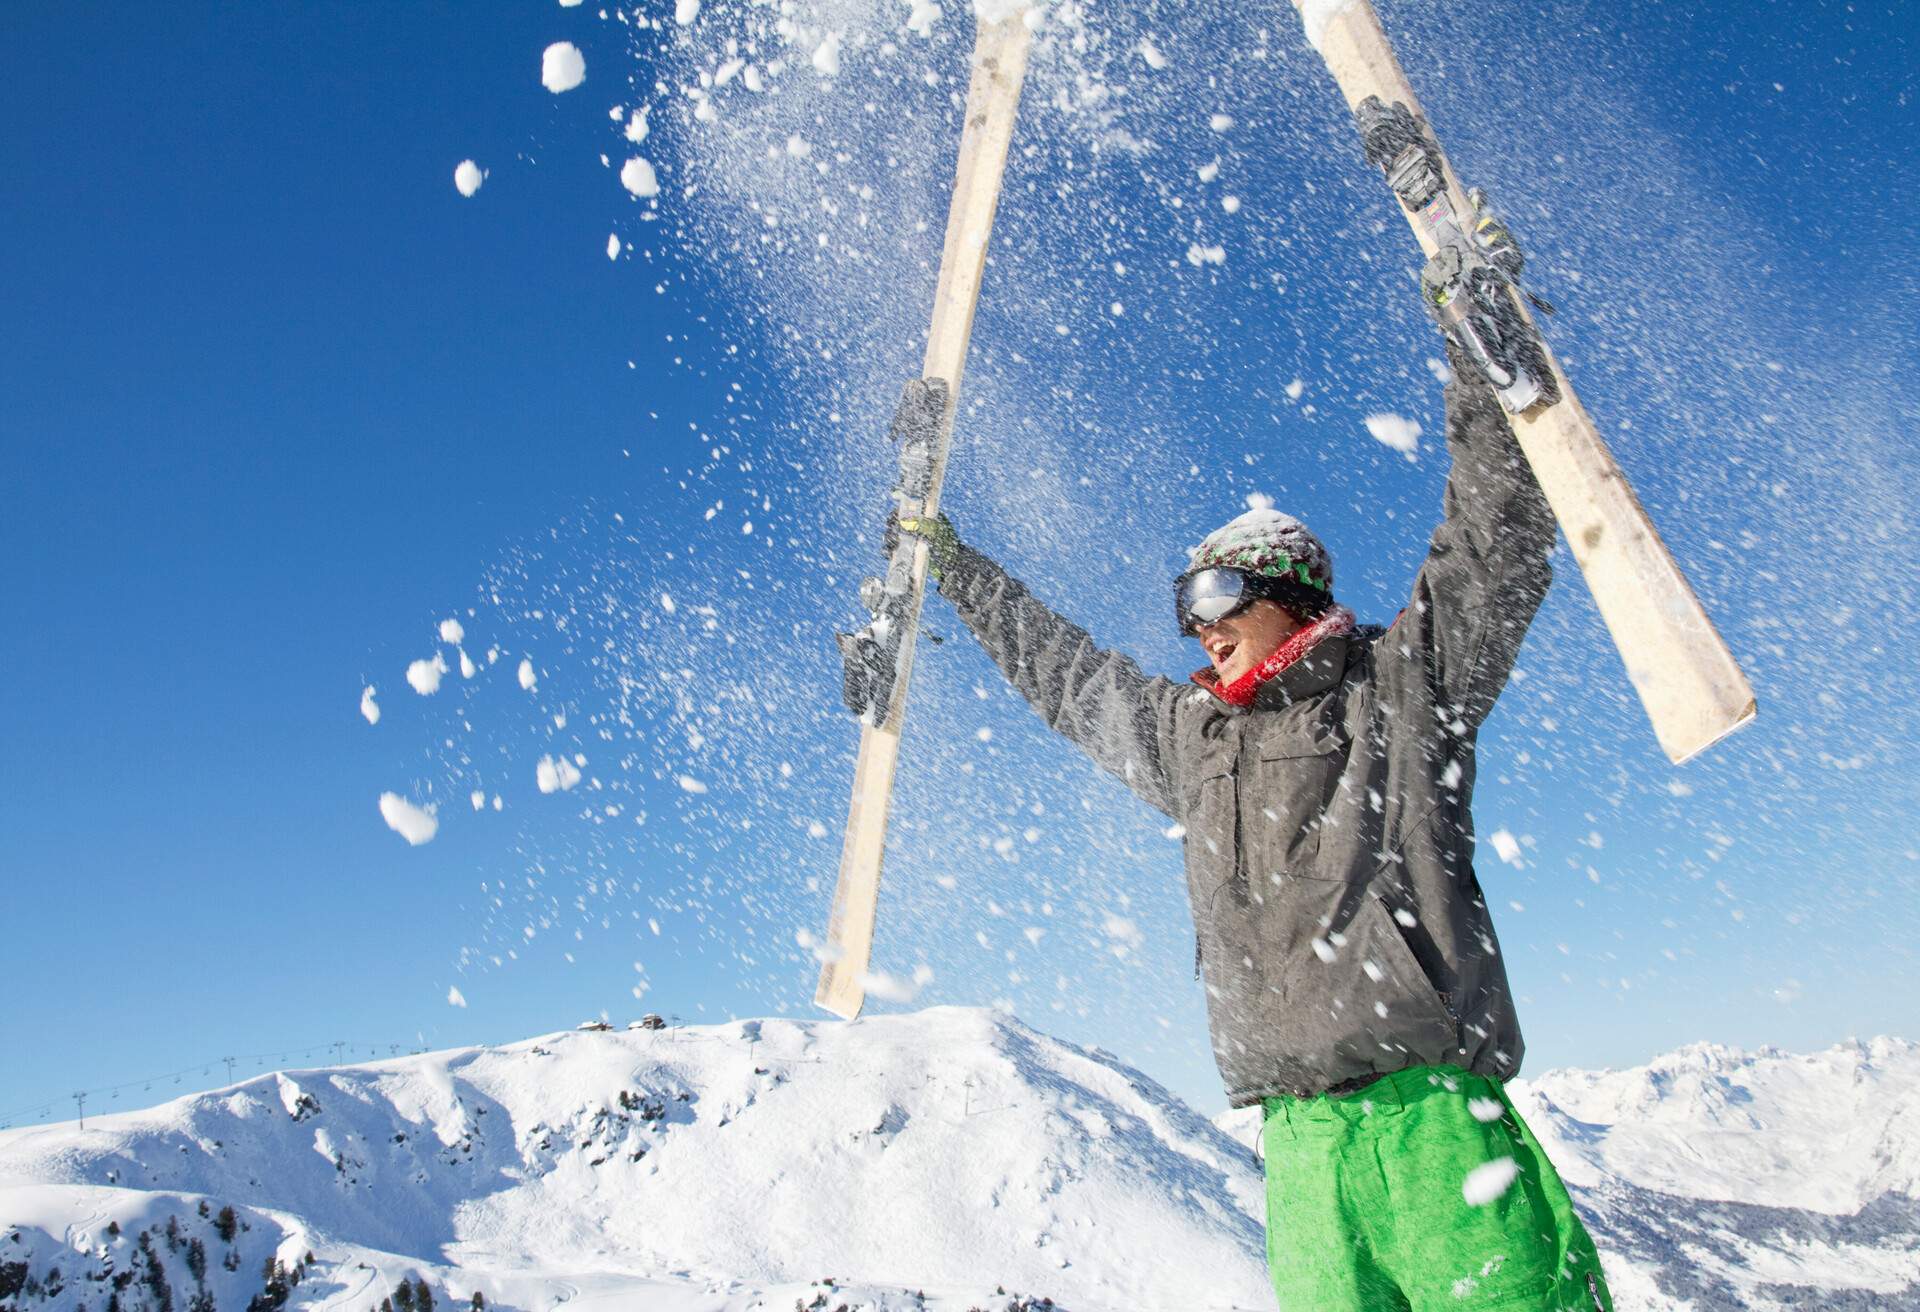 A man dressed for winter raising his ski in the air, causing the snow to spray all around.